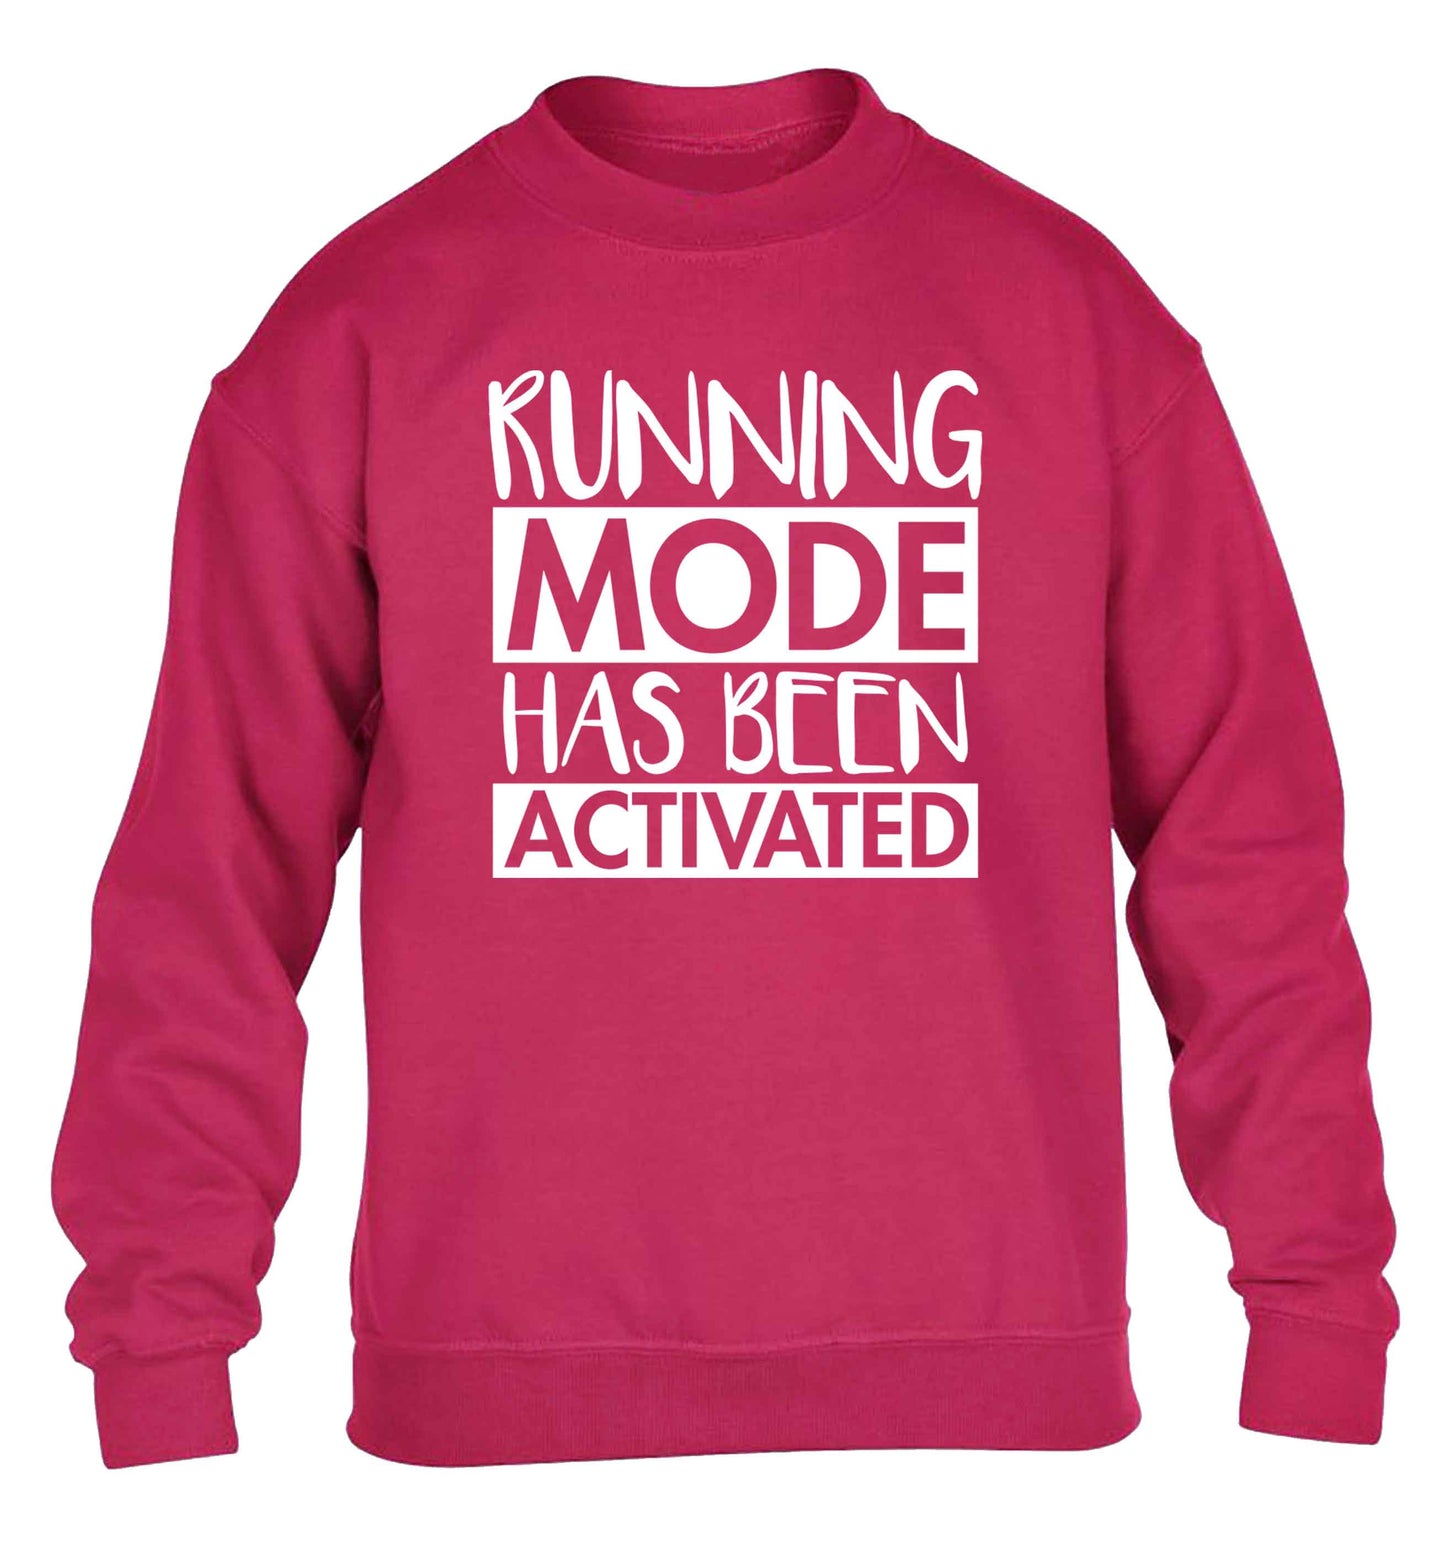 Running mode has been activated children's pink sweater 12-13 Years